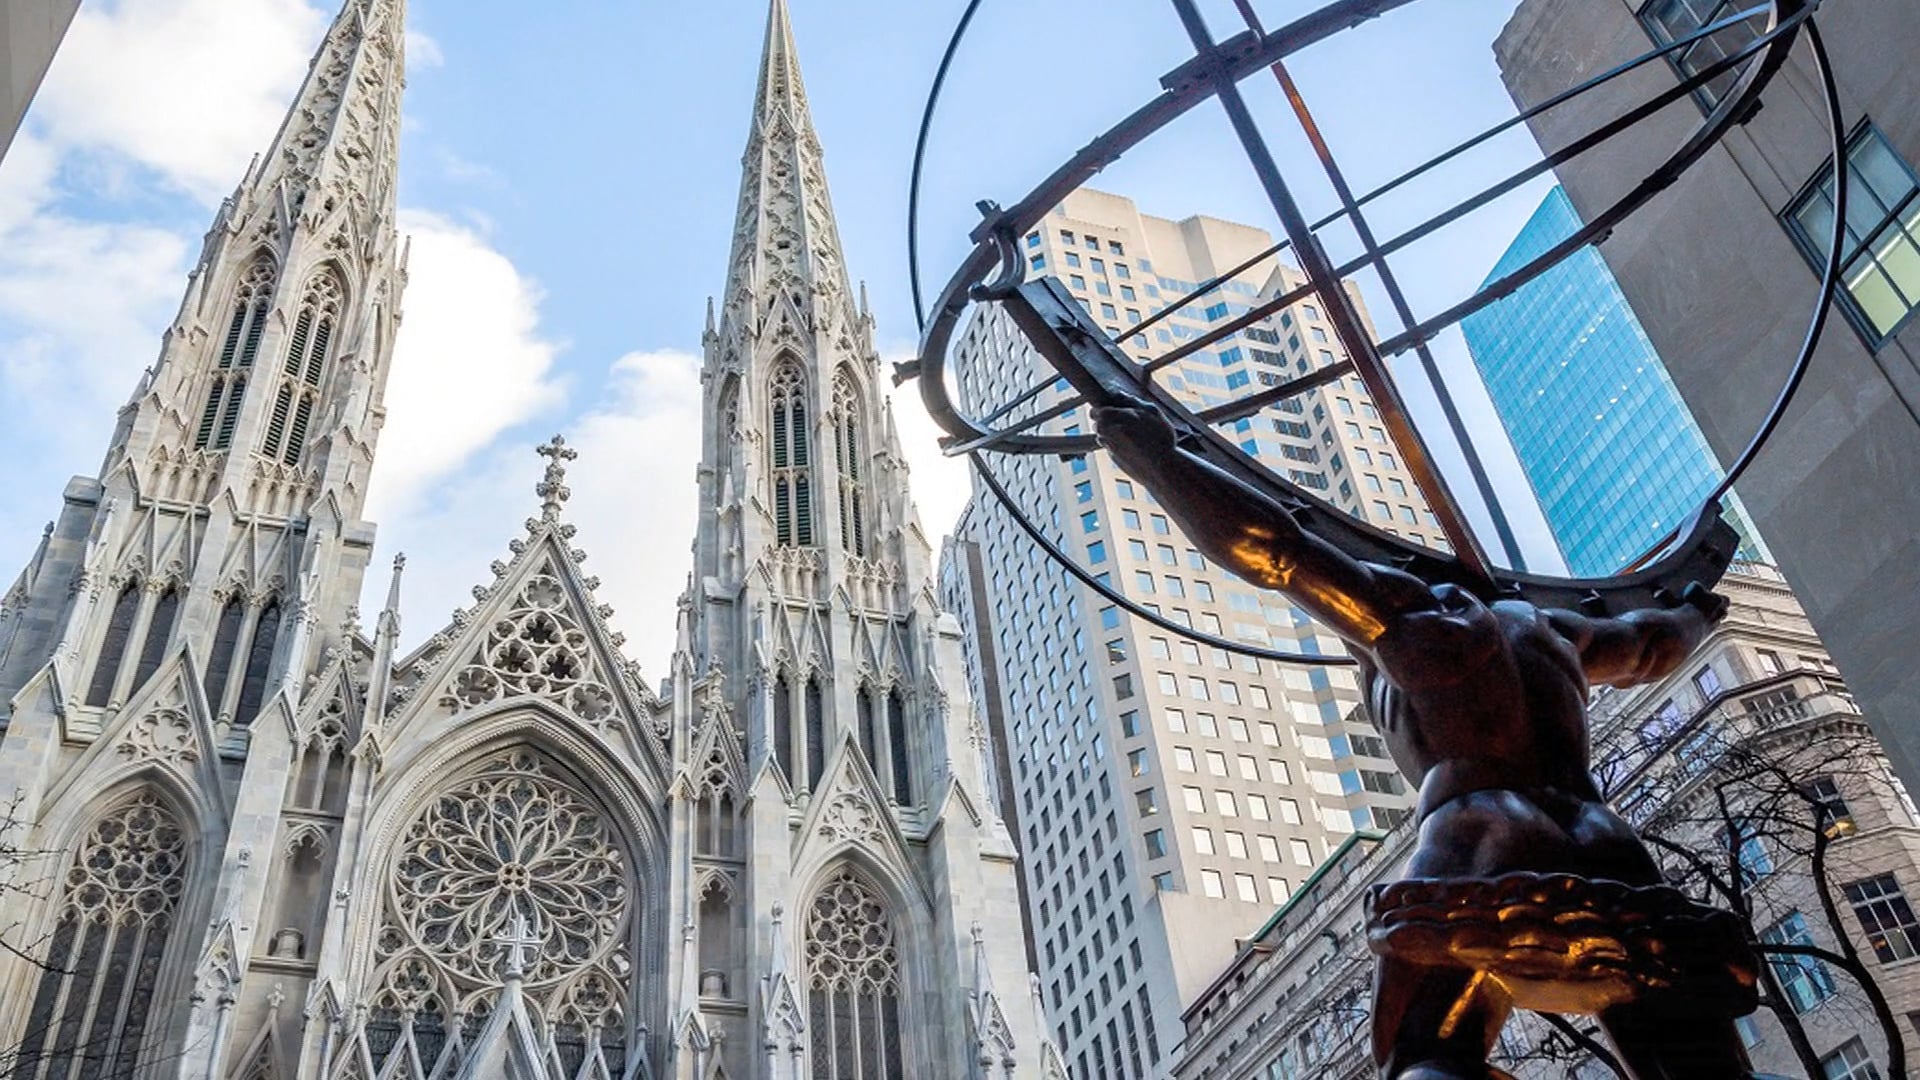 Mass from St. Patrick's Cathedral - June 28, 2022